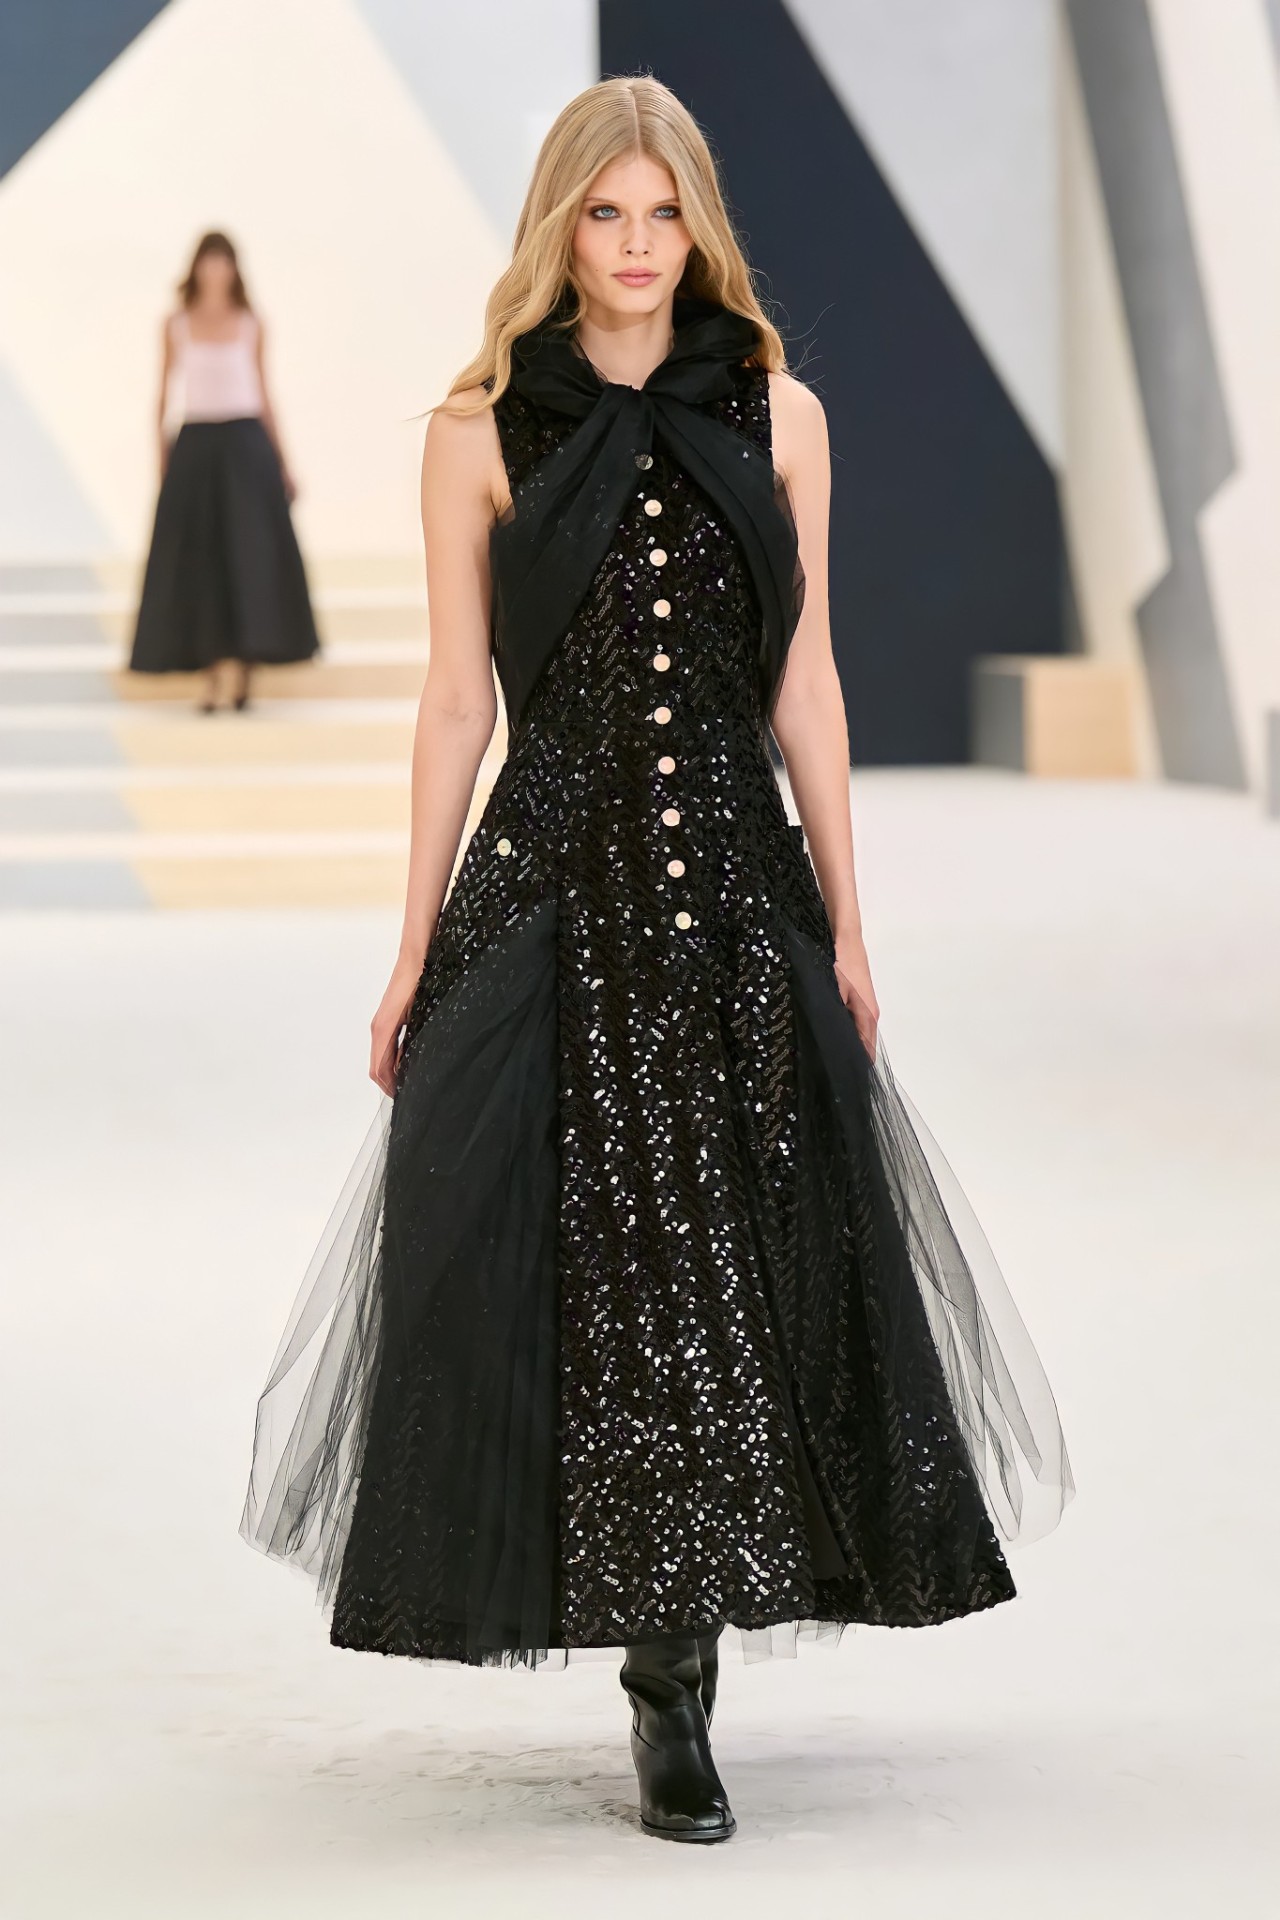 Chanel's Fall-Winter 2022/23 Haute Couture collection - PressReader